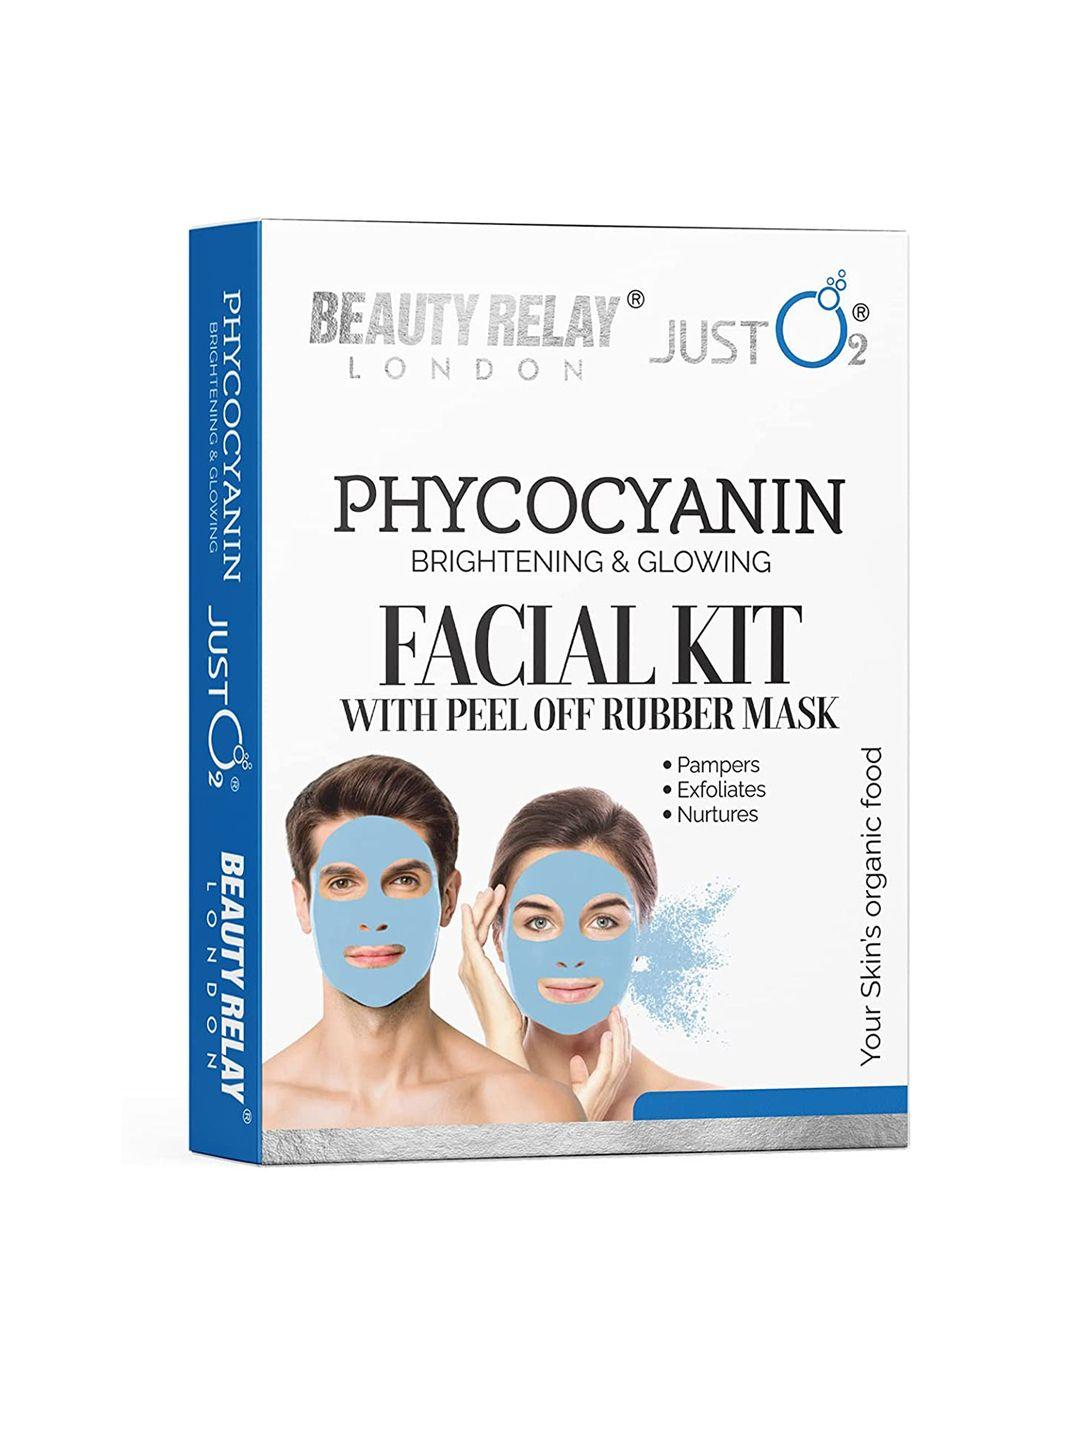 beautyrelay london phycocyanin brightening & glowing facial kit with peel of rubber mask 59g